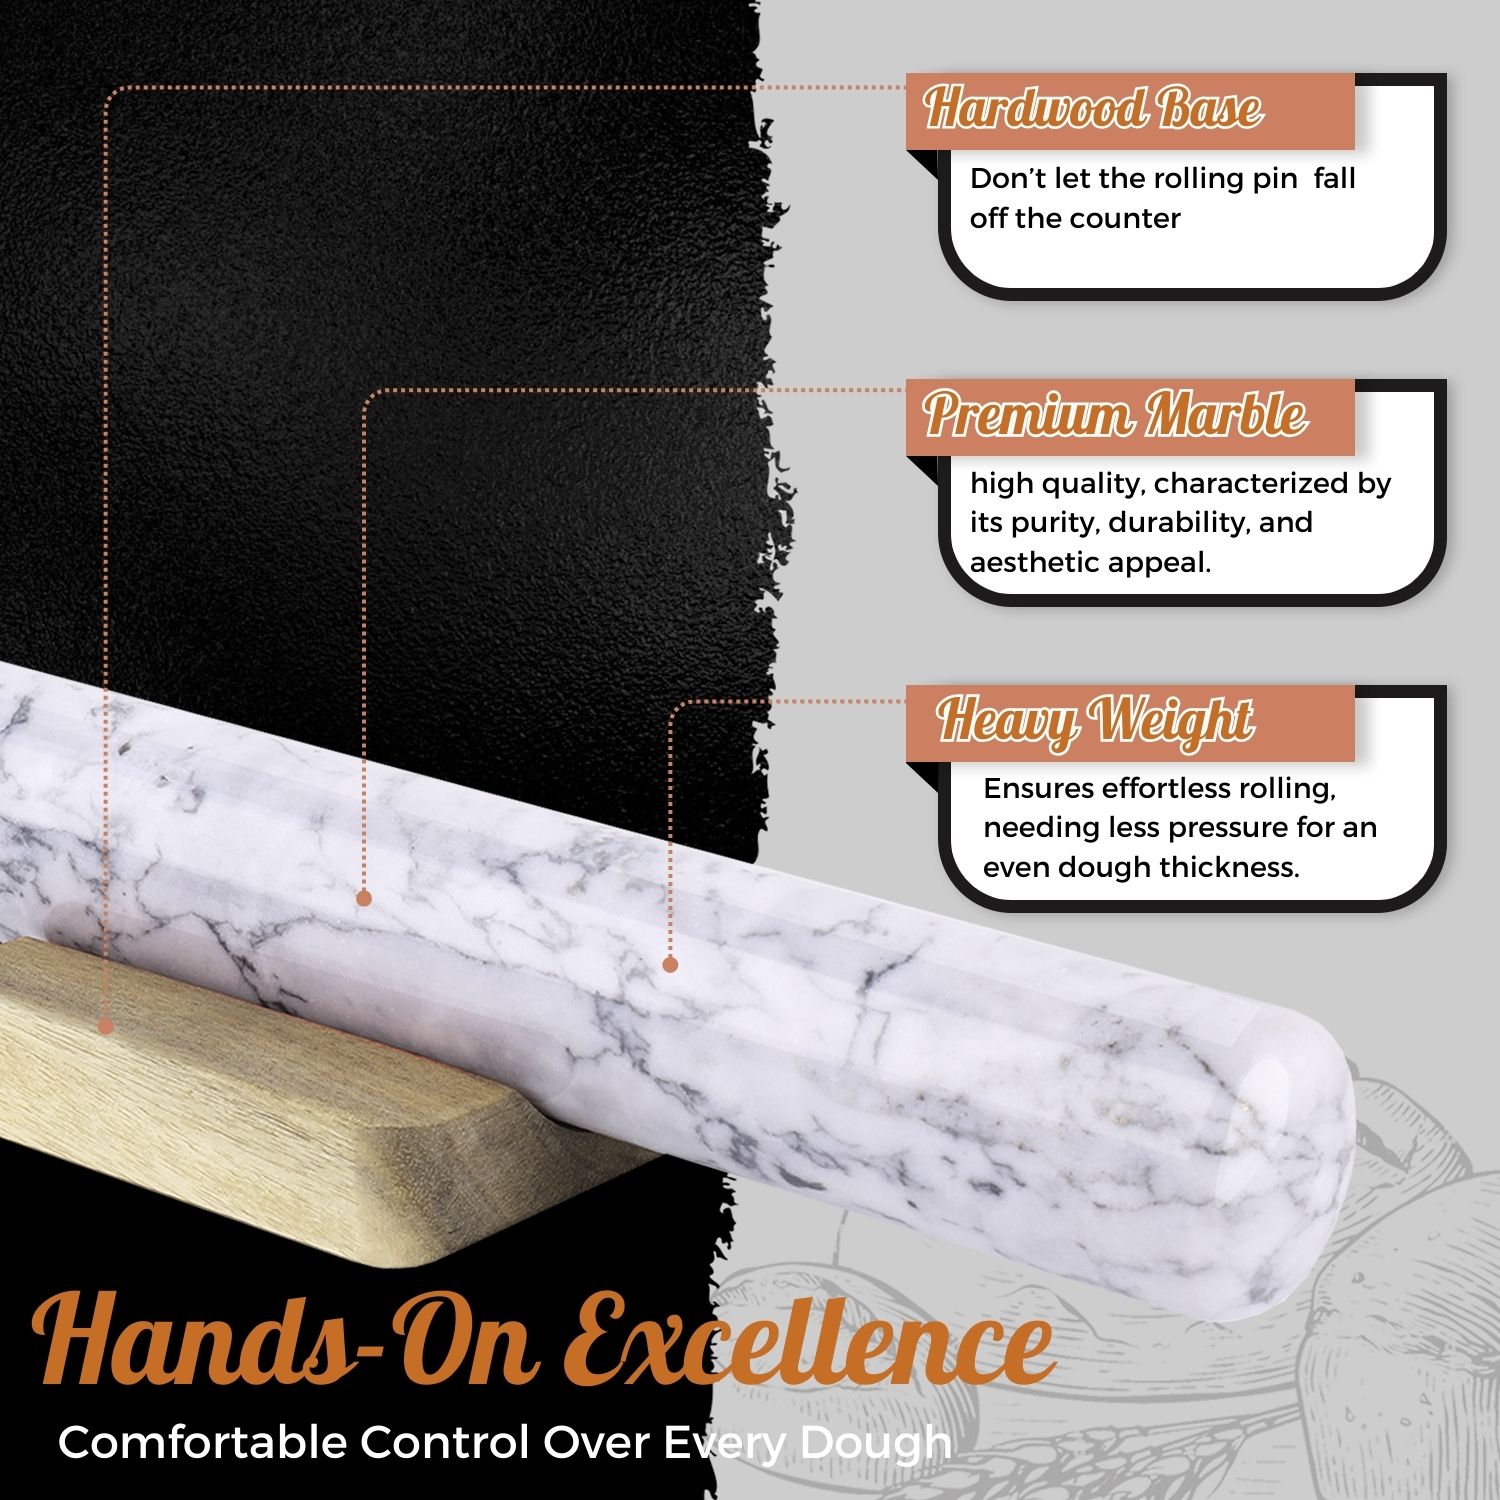 Cool-to-the-Touch Marble Surface - Keeps dough cool. Marble material is known to be an excellent insulator, and it stays relatively cool even at room temperatures. The cooling temperature of this rolling pin can be increased by putting it in the fridge for 10 to 15 minutes